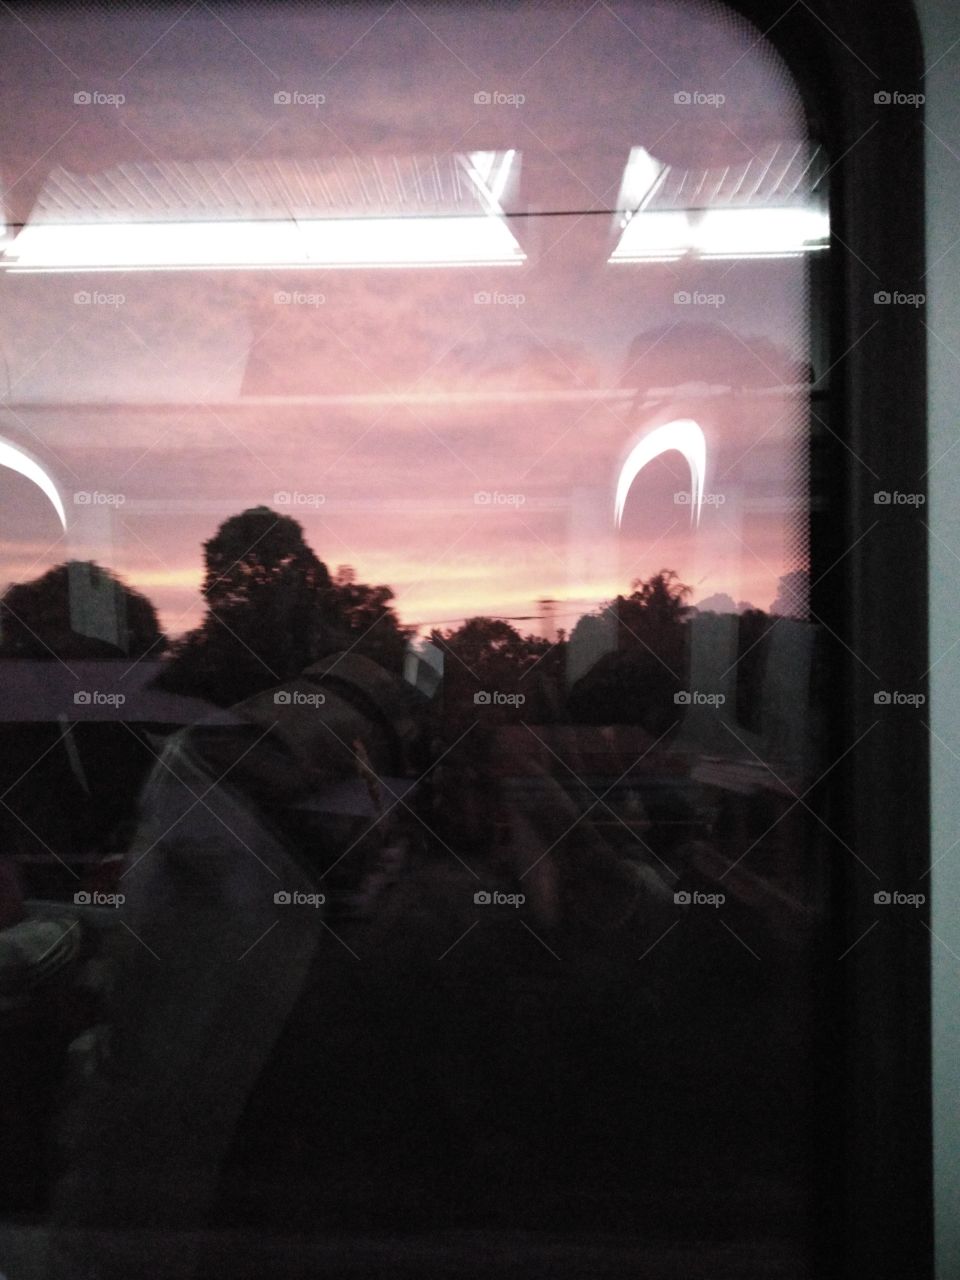 The beautiful color of the sky captured from inside a moving train.